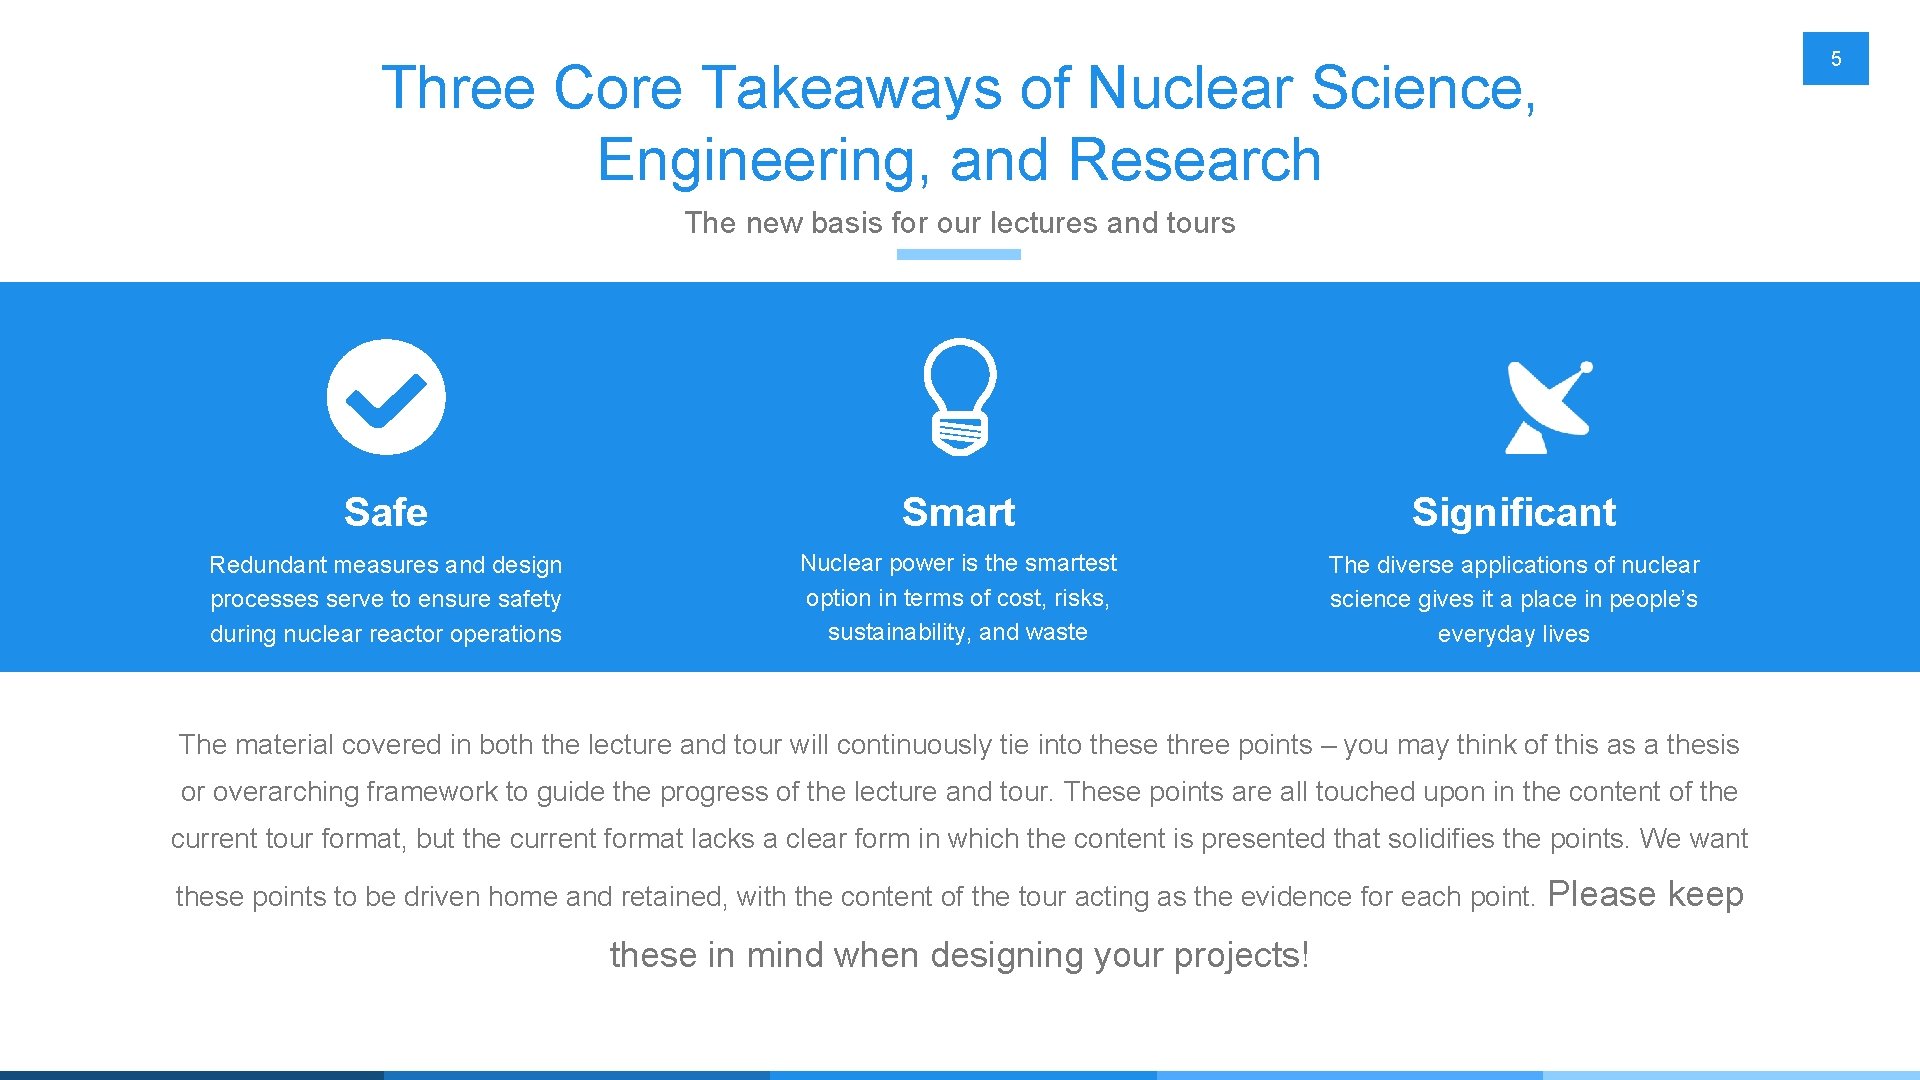 5 Three Core Takeaways of Nuclear Science, Engineering, and Research The new basis for